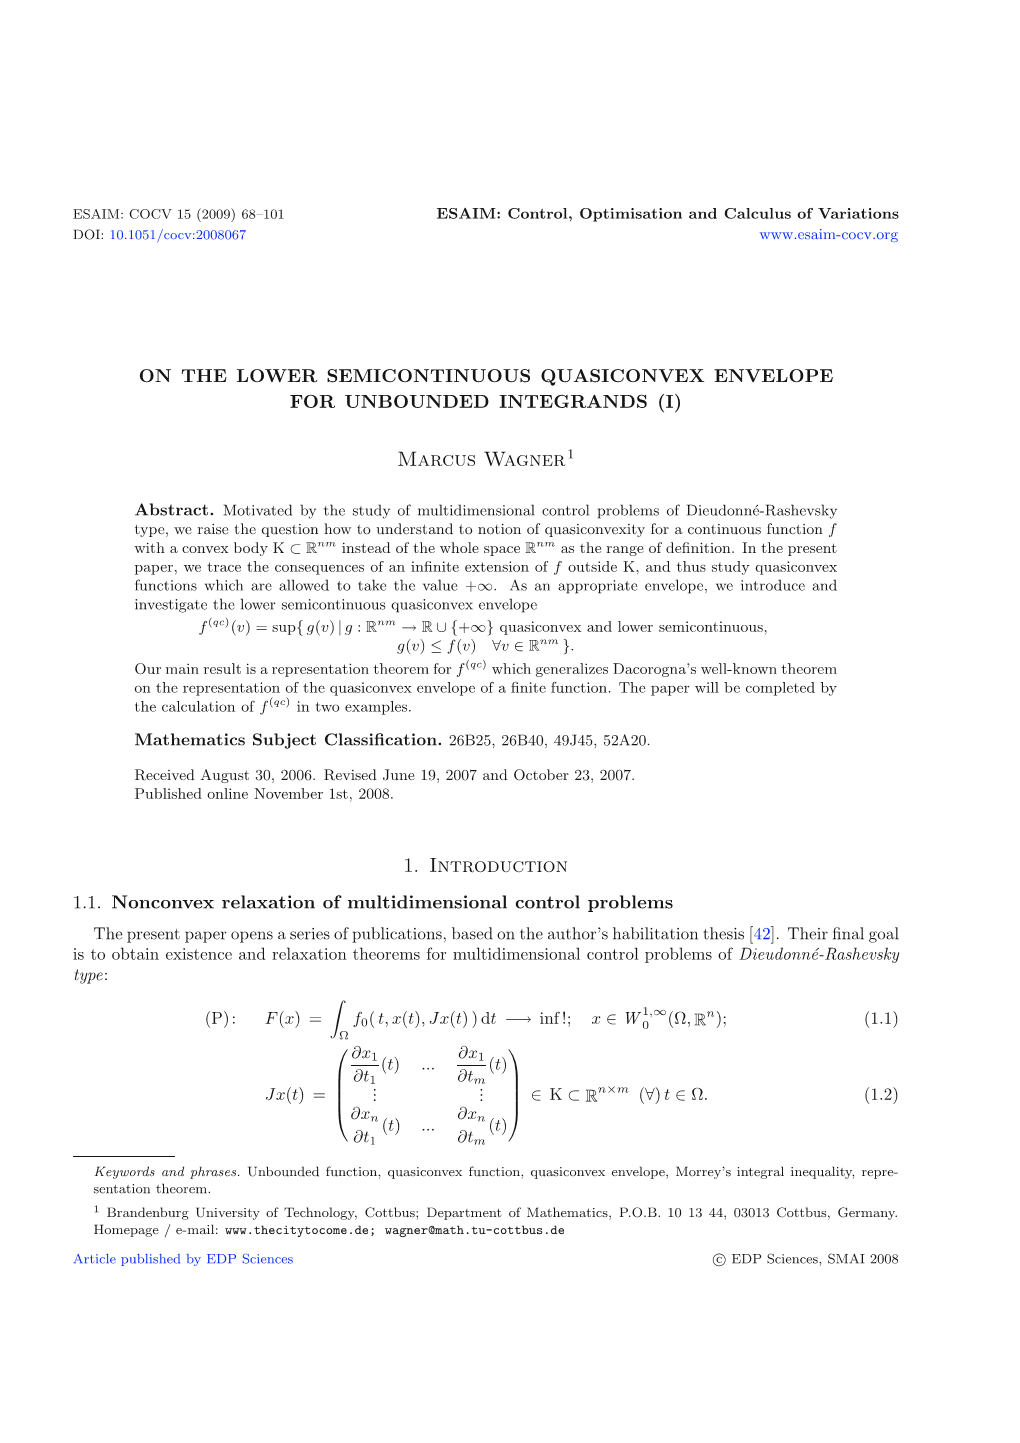 On the Lower Semicontinuous Quasiconvex Envelope for Unbounded Integrands (I)